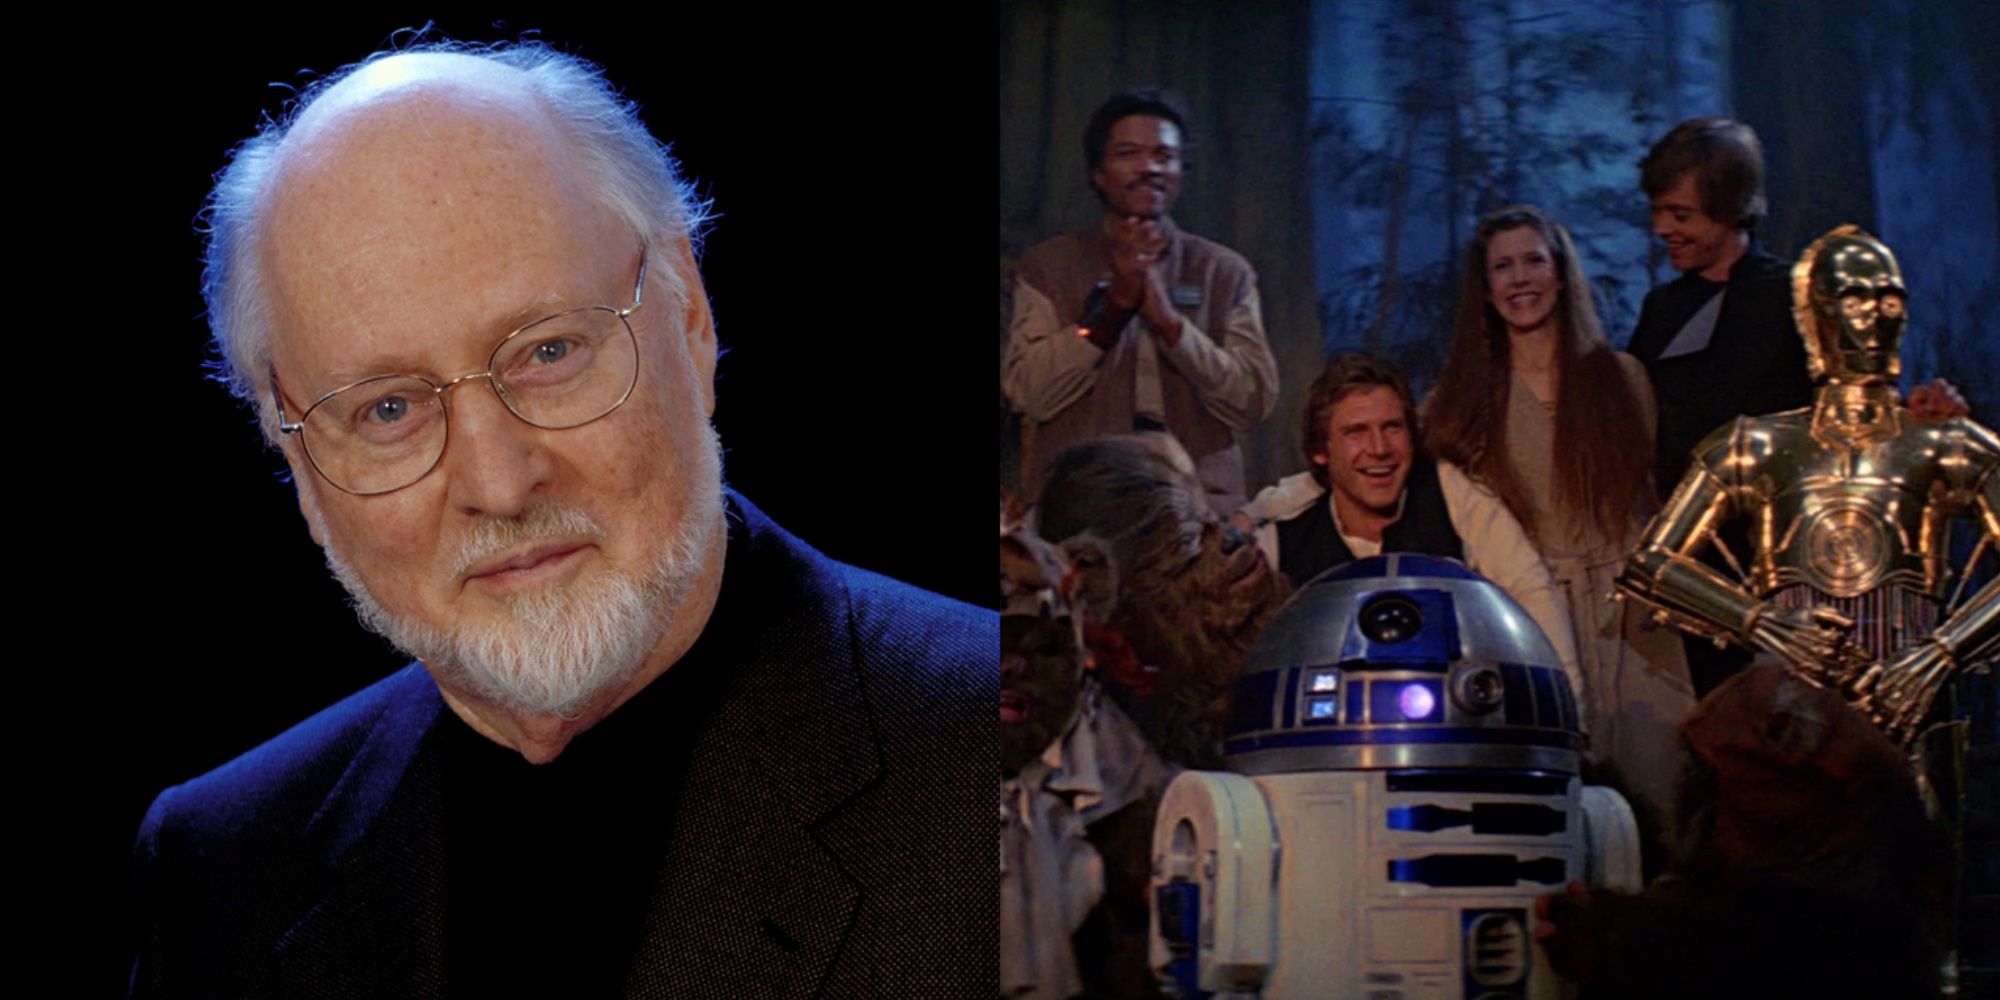 Split image of John Williams against a black background and the Rebels celebrating in Return of the Jedi